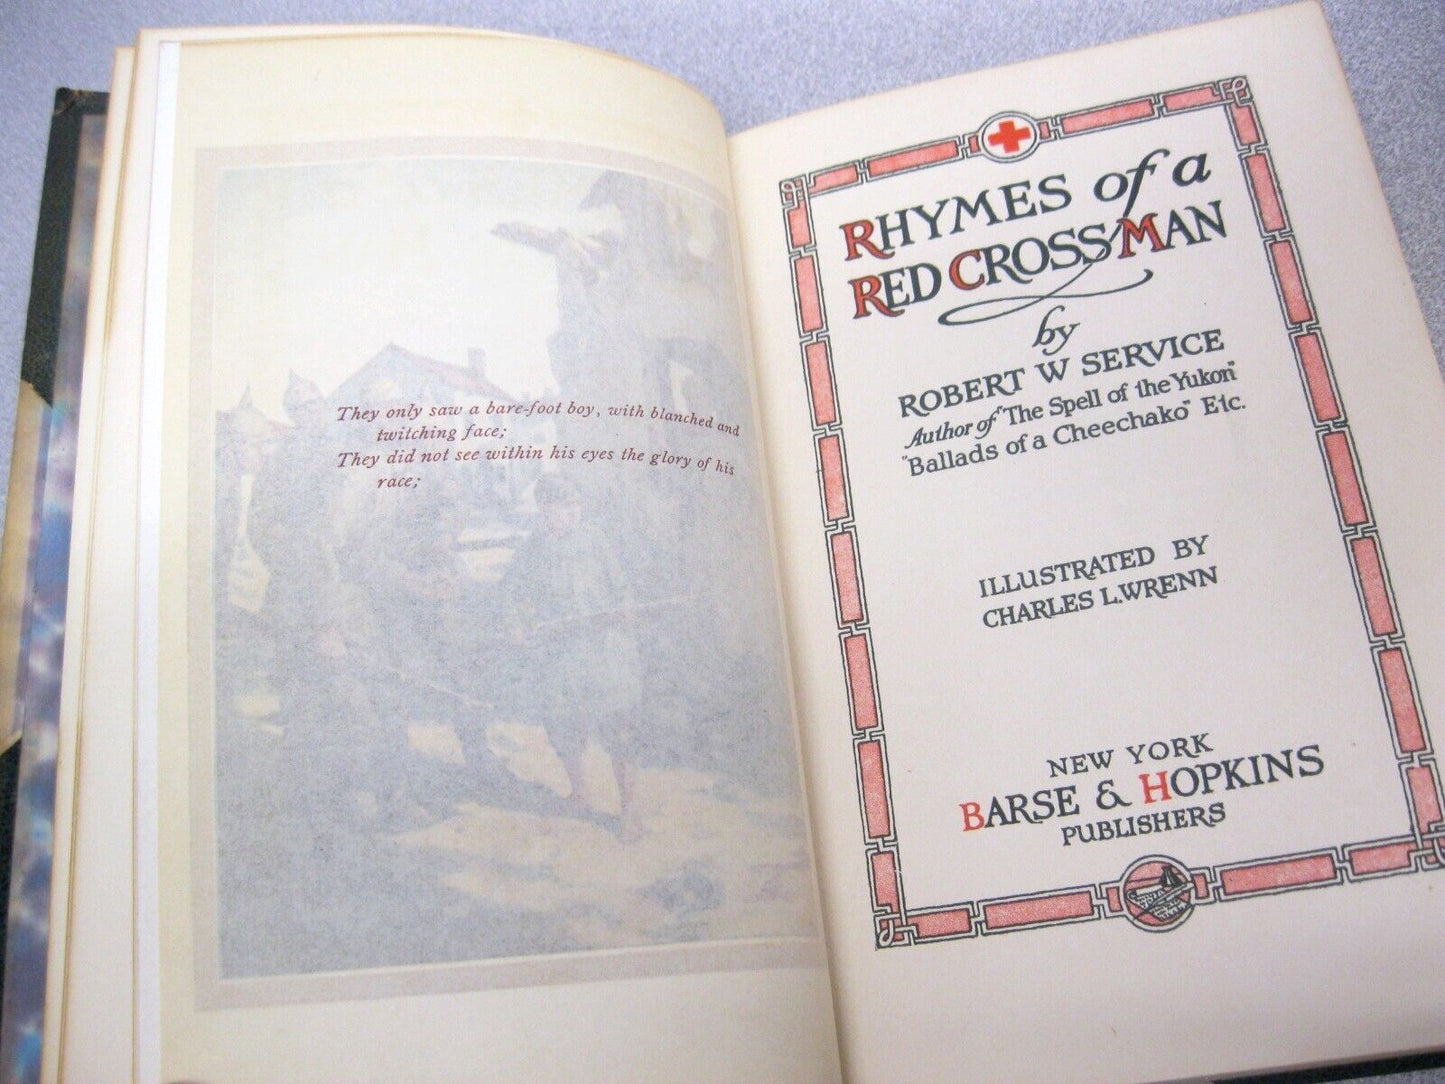 Rhymes of a Red Cross Man by Robert Service